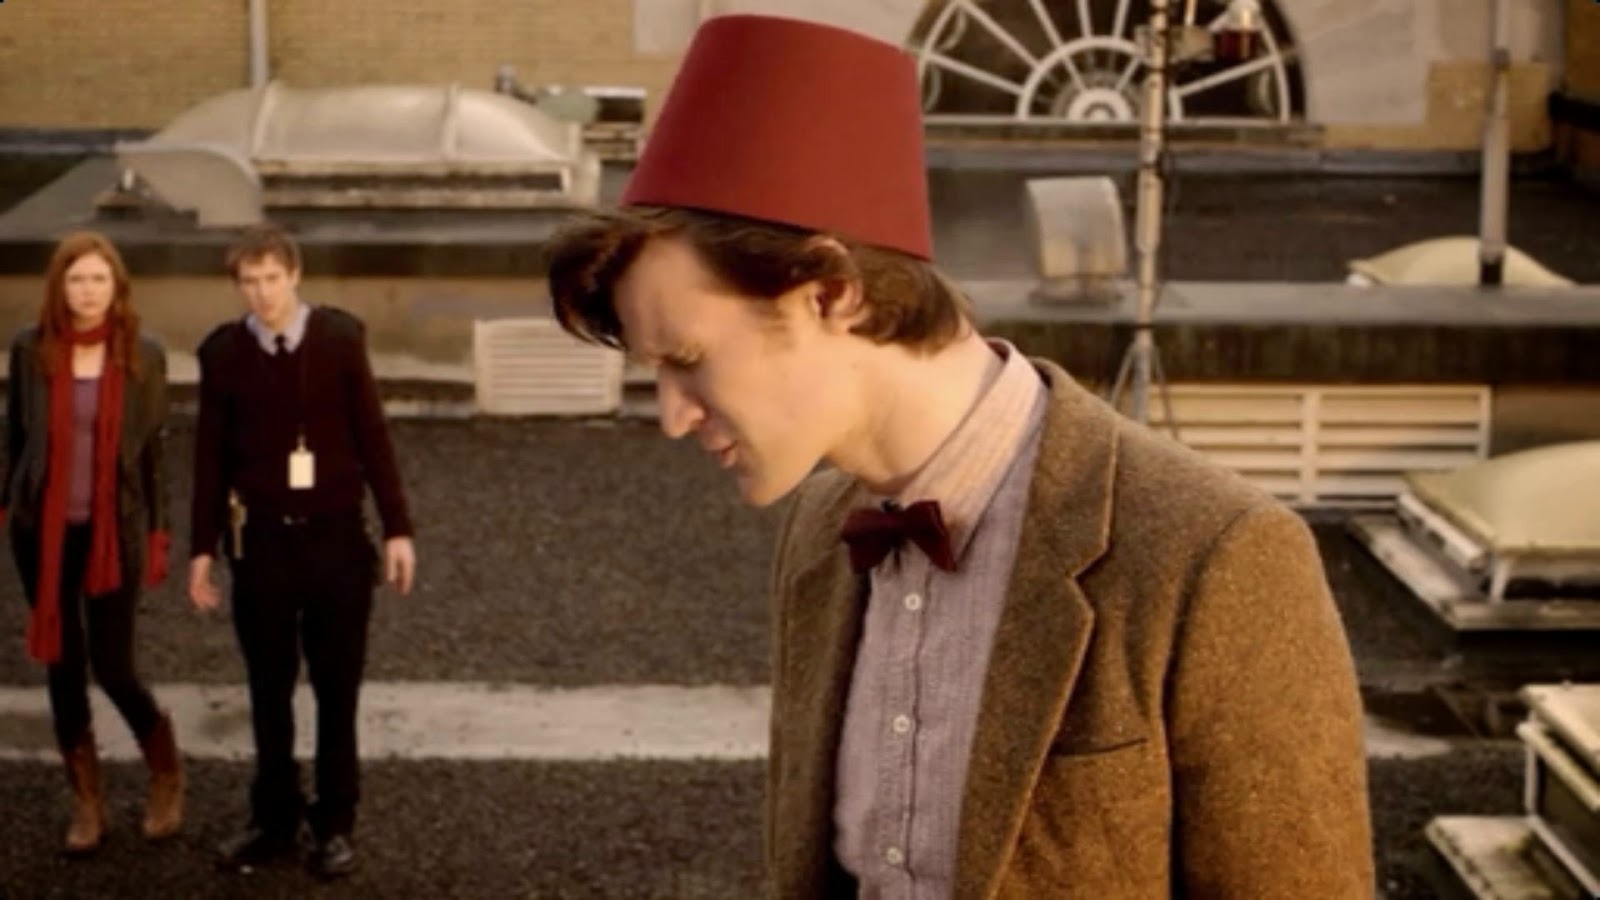 Doctor Who 11Th Doctor Fez : Notti S Blog Eleventh Doctor The Fez Look. 